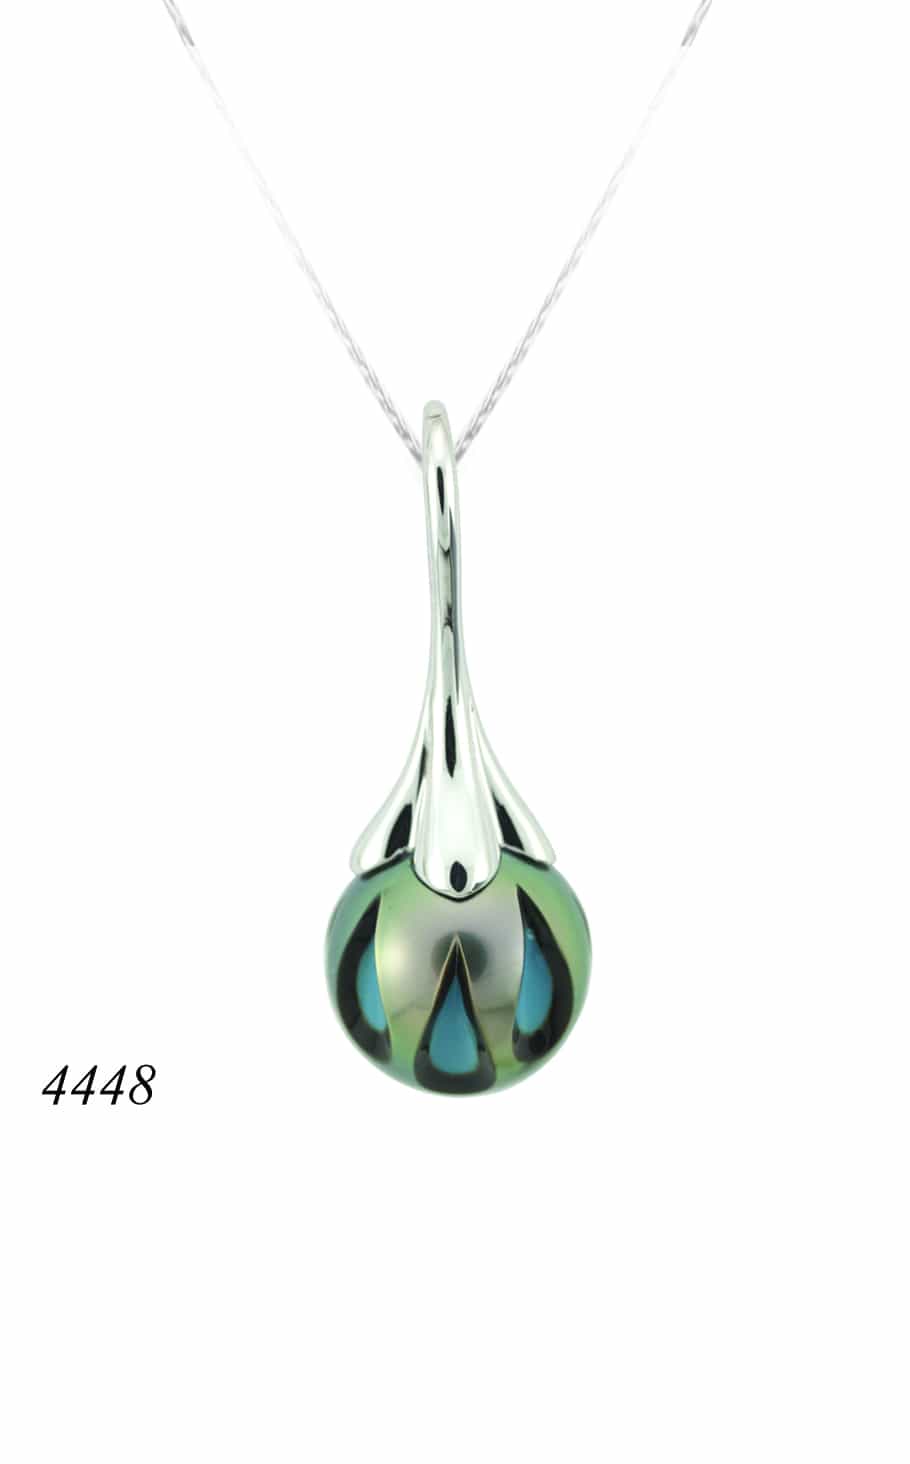 Necklace 4448